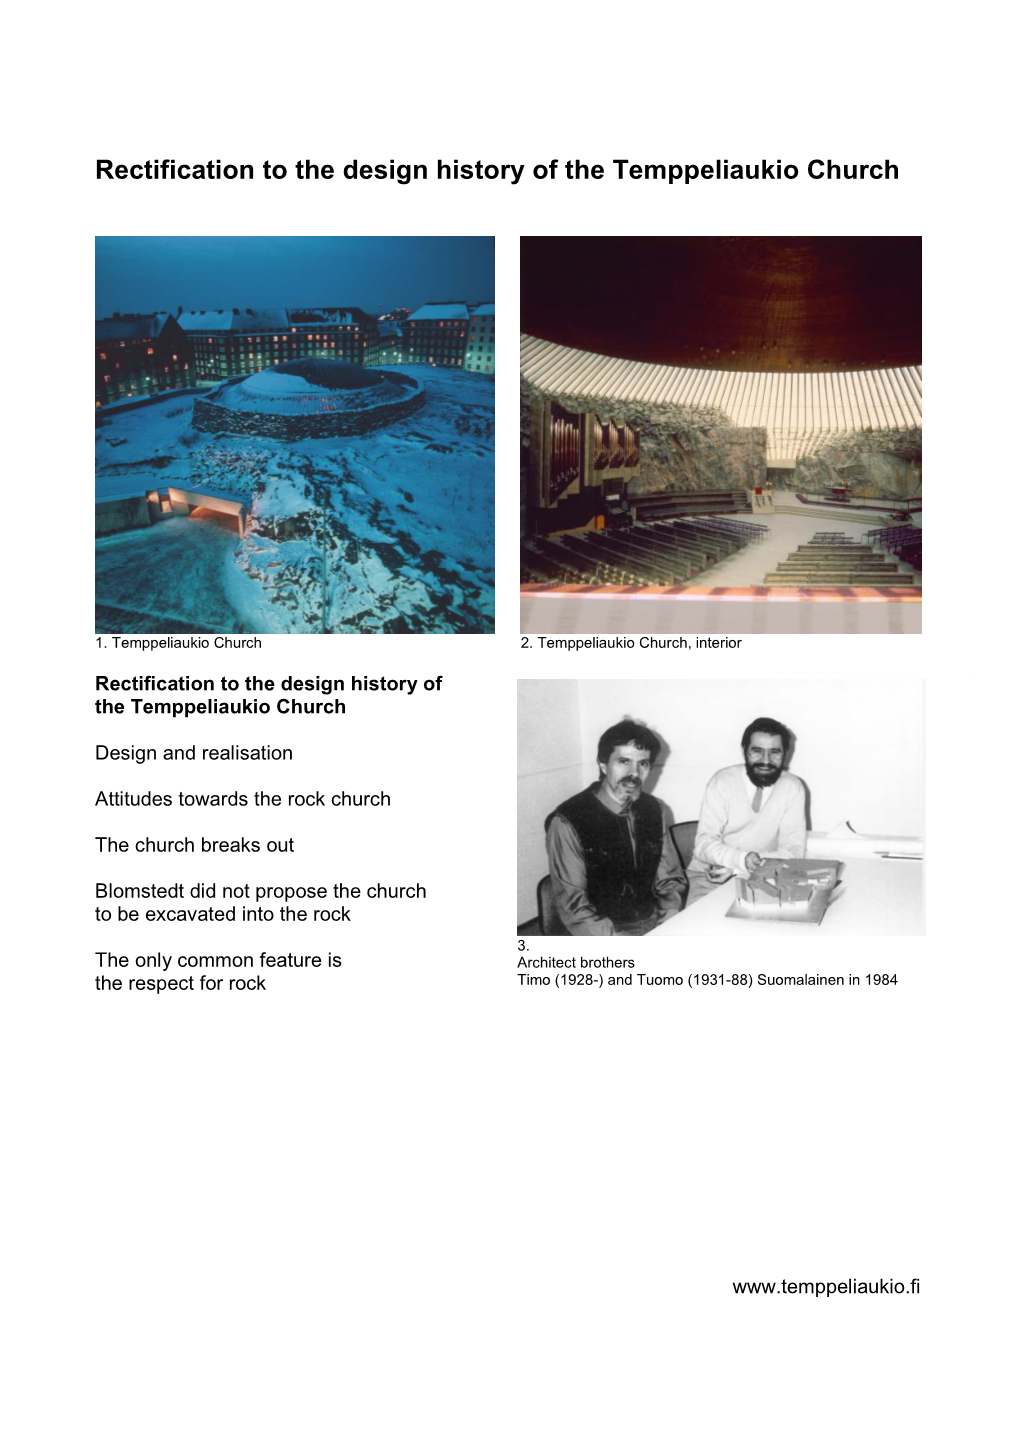 Rectification to the Design History of the Temppeliaukio Church Pdf